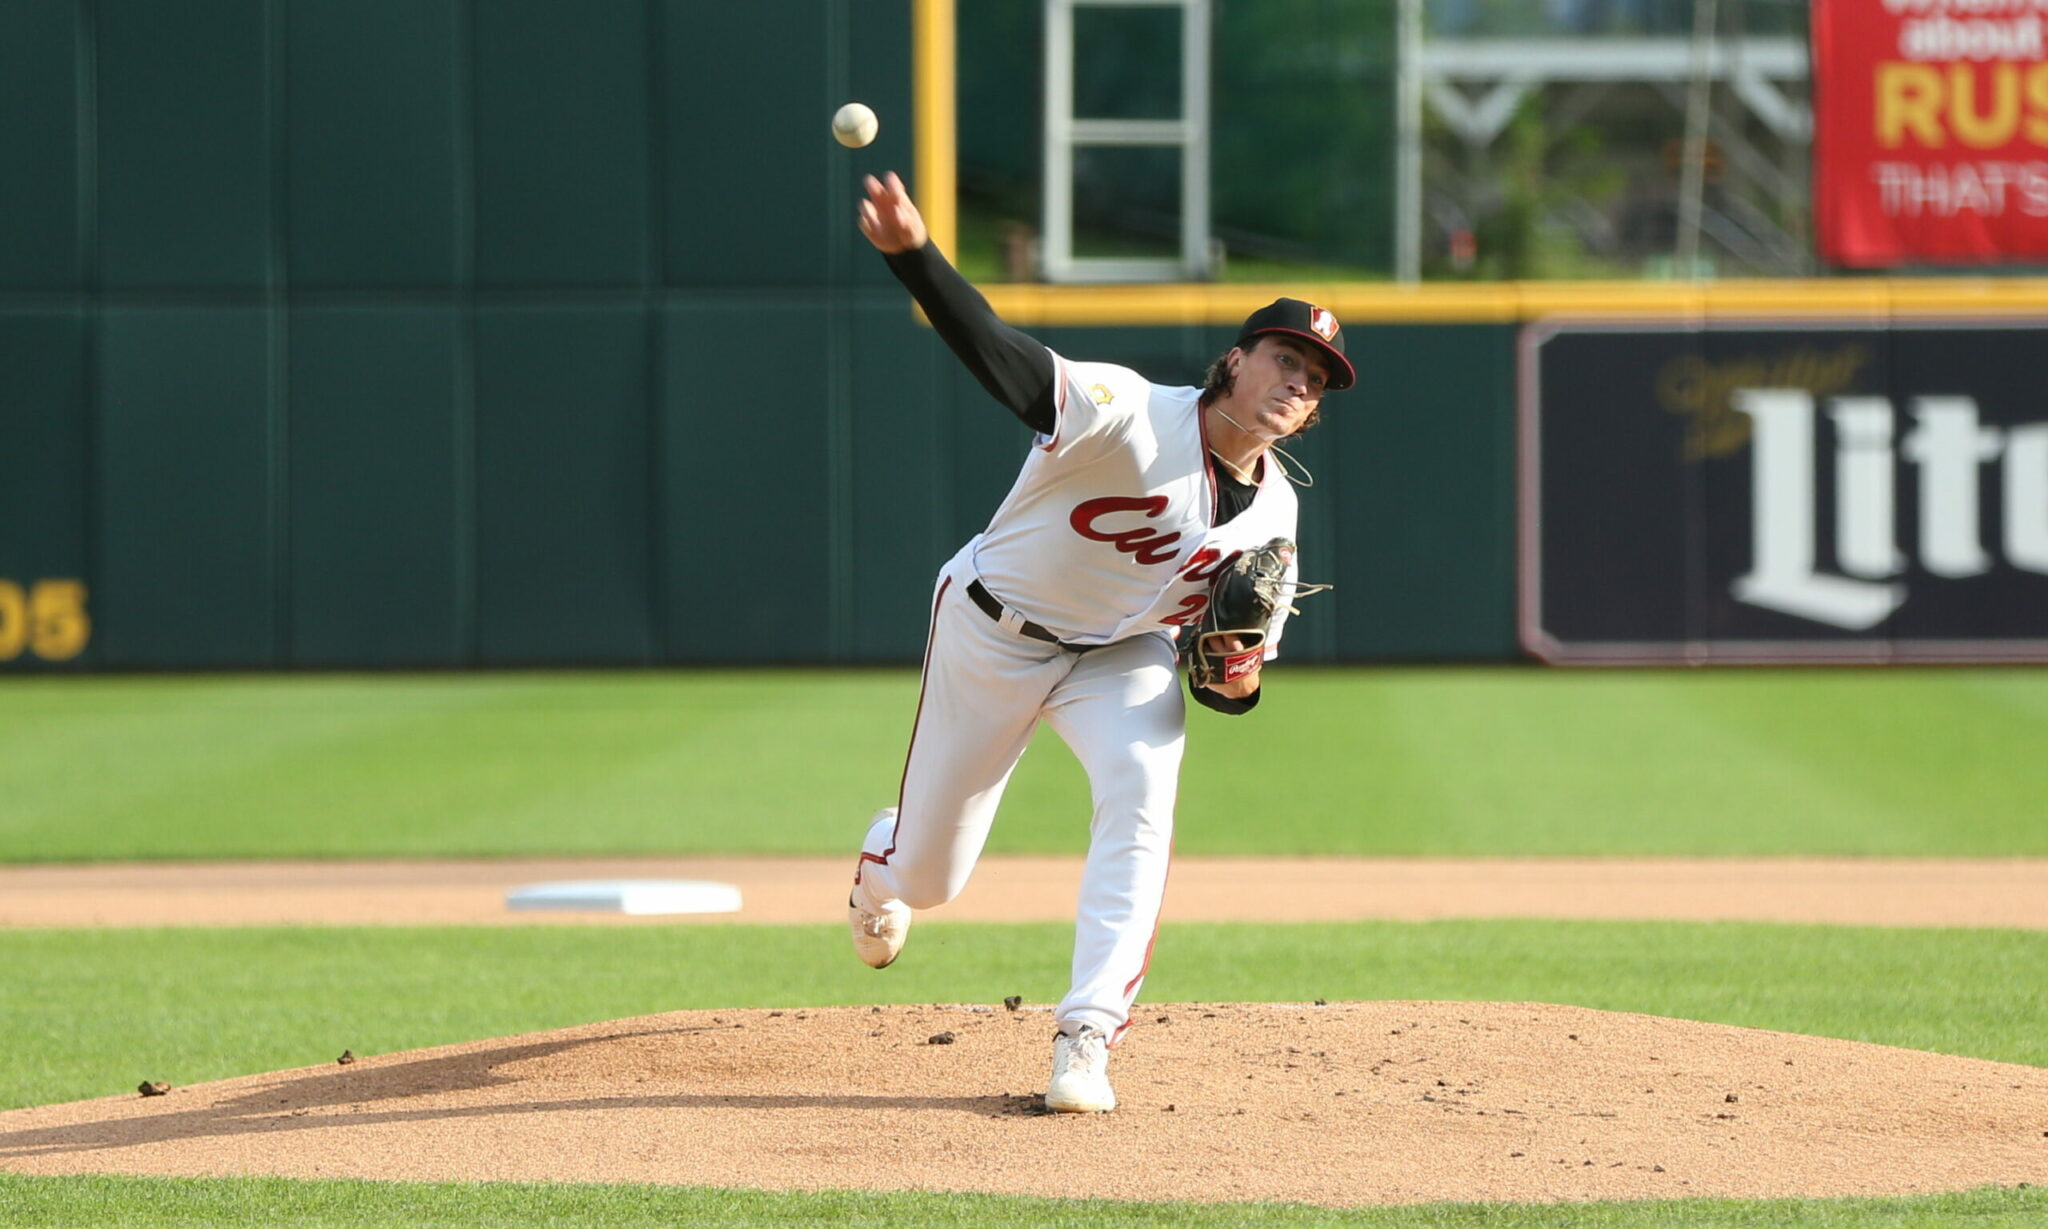 Pirates Prospects Daily: The Two Sides Of Kyle Nicolas On The Mound